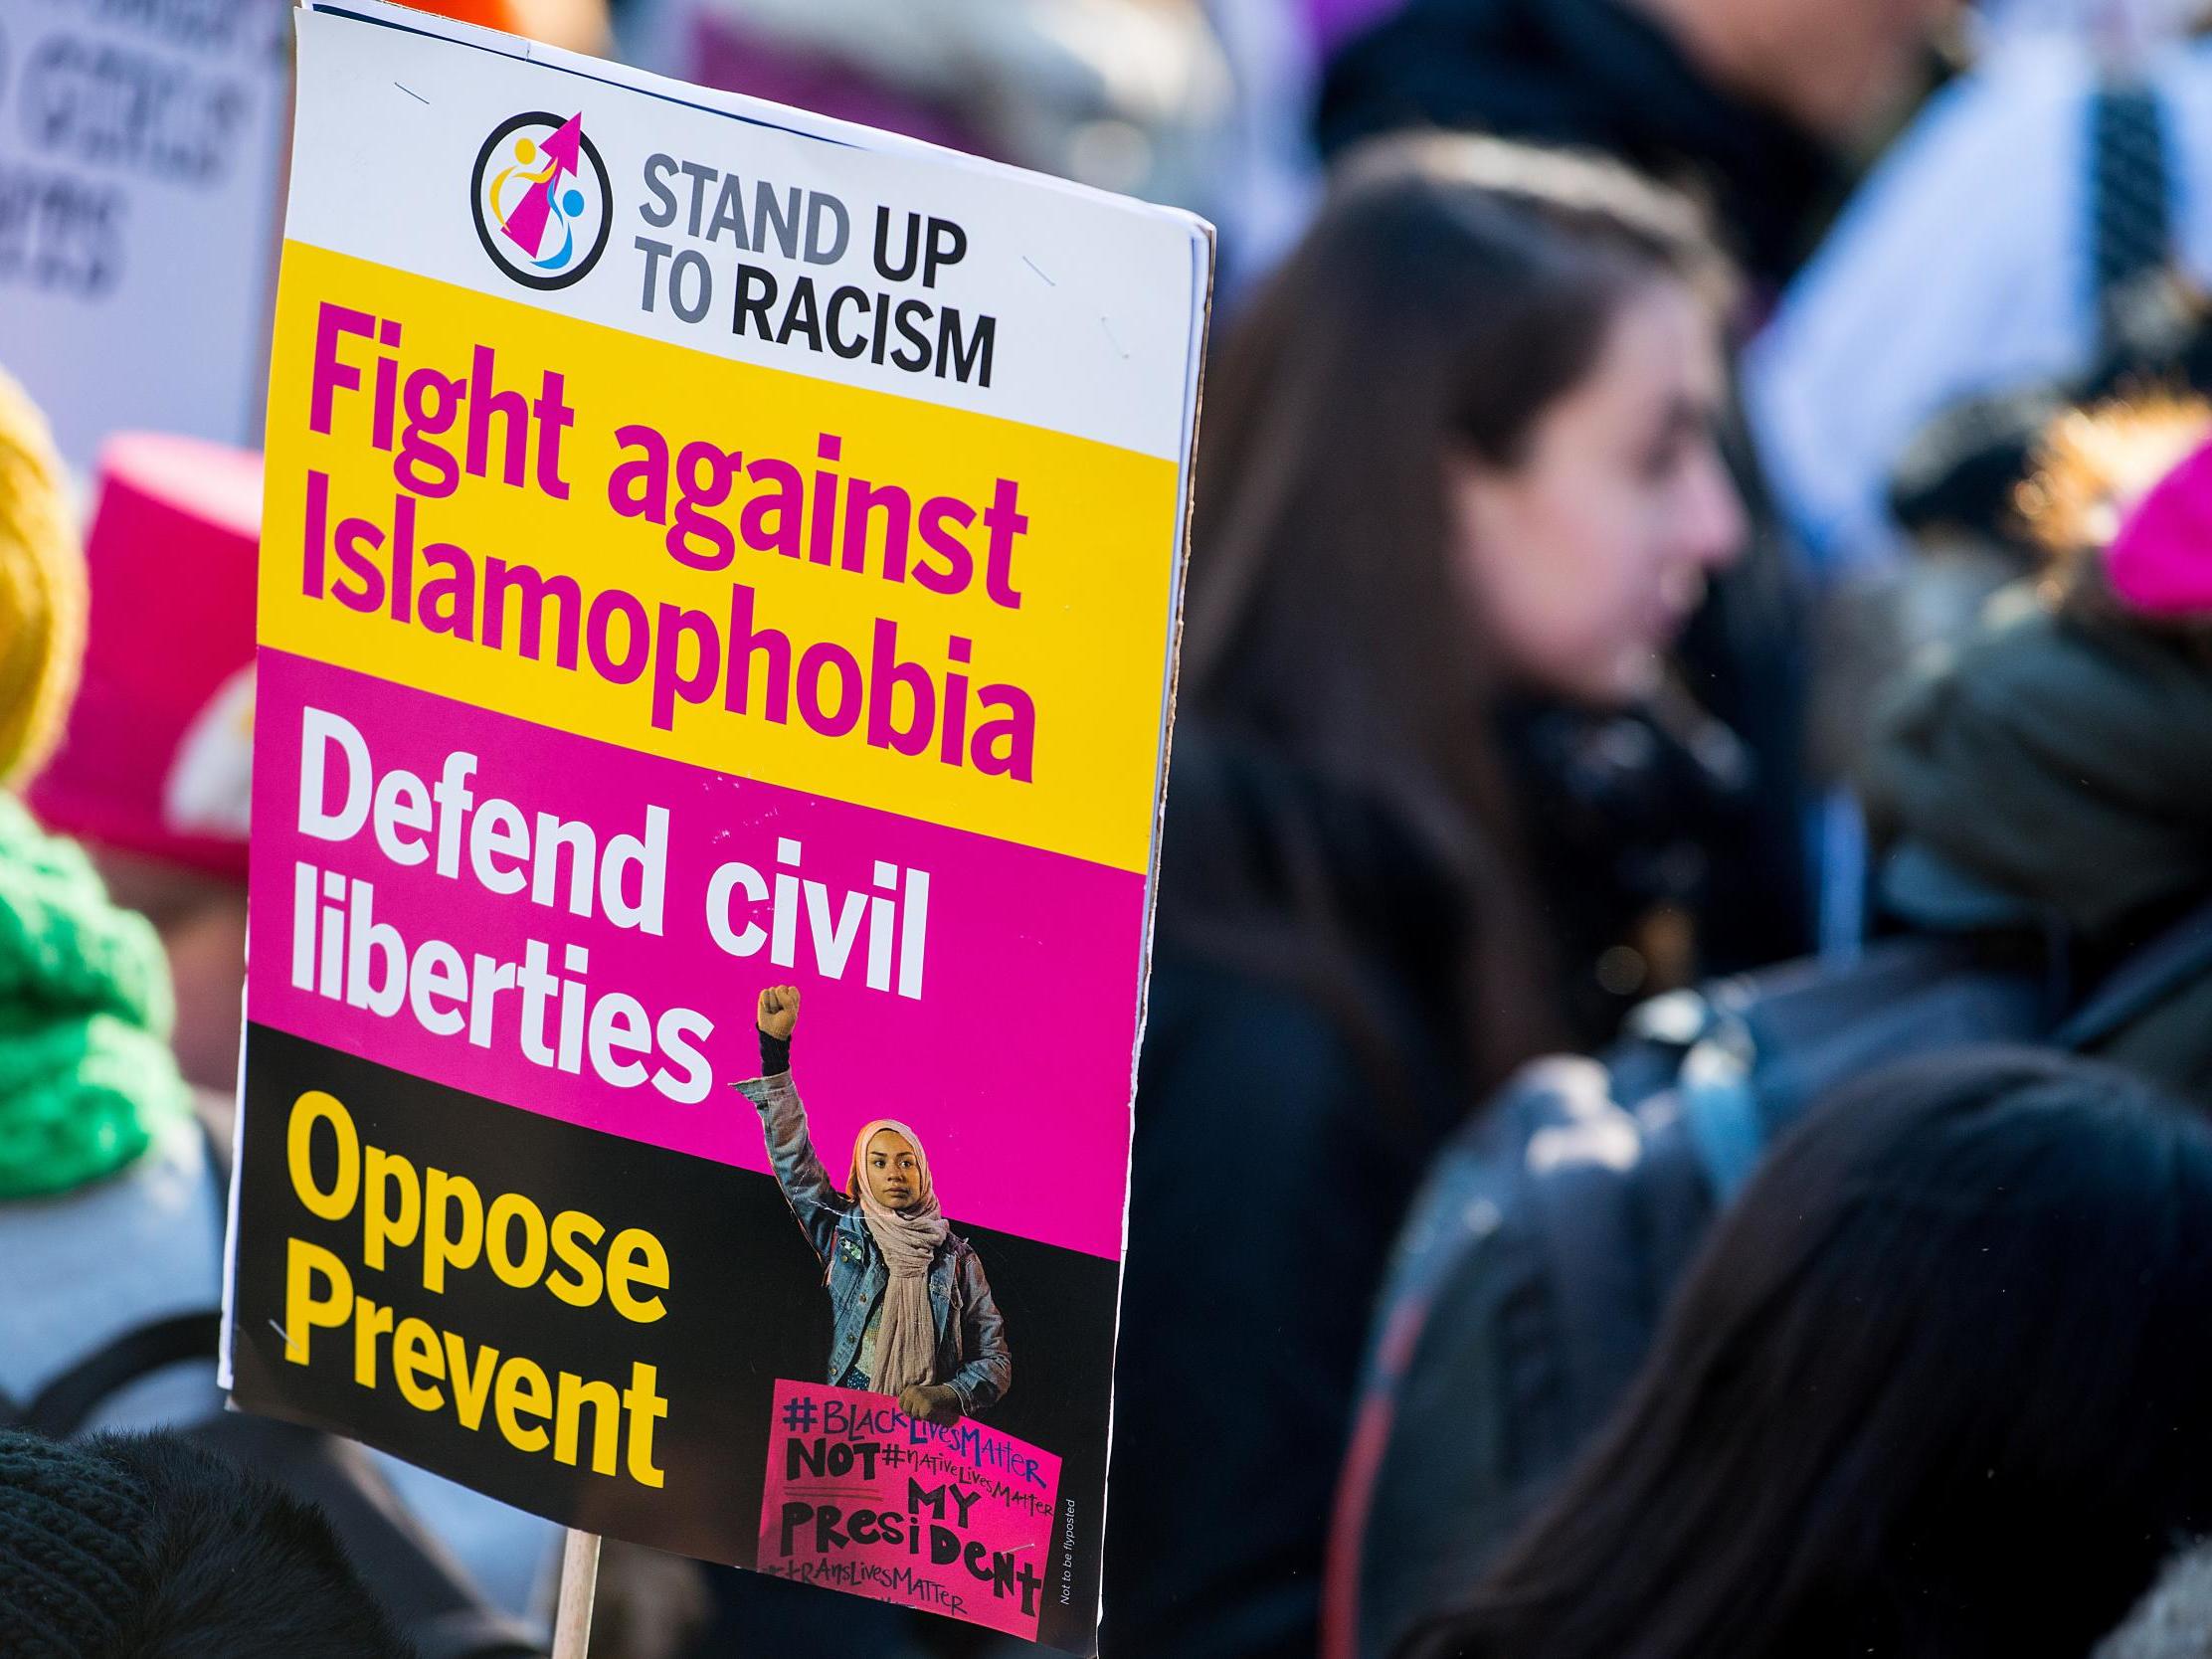 The suggested definition of Islamophobia has been adopted by several political parties